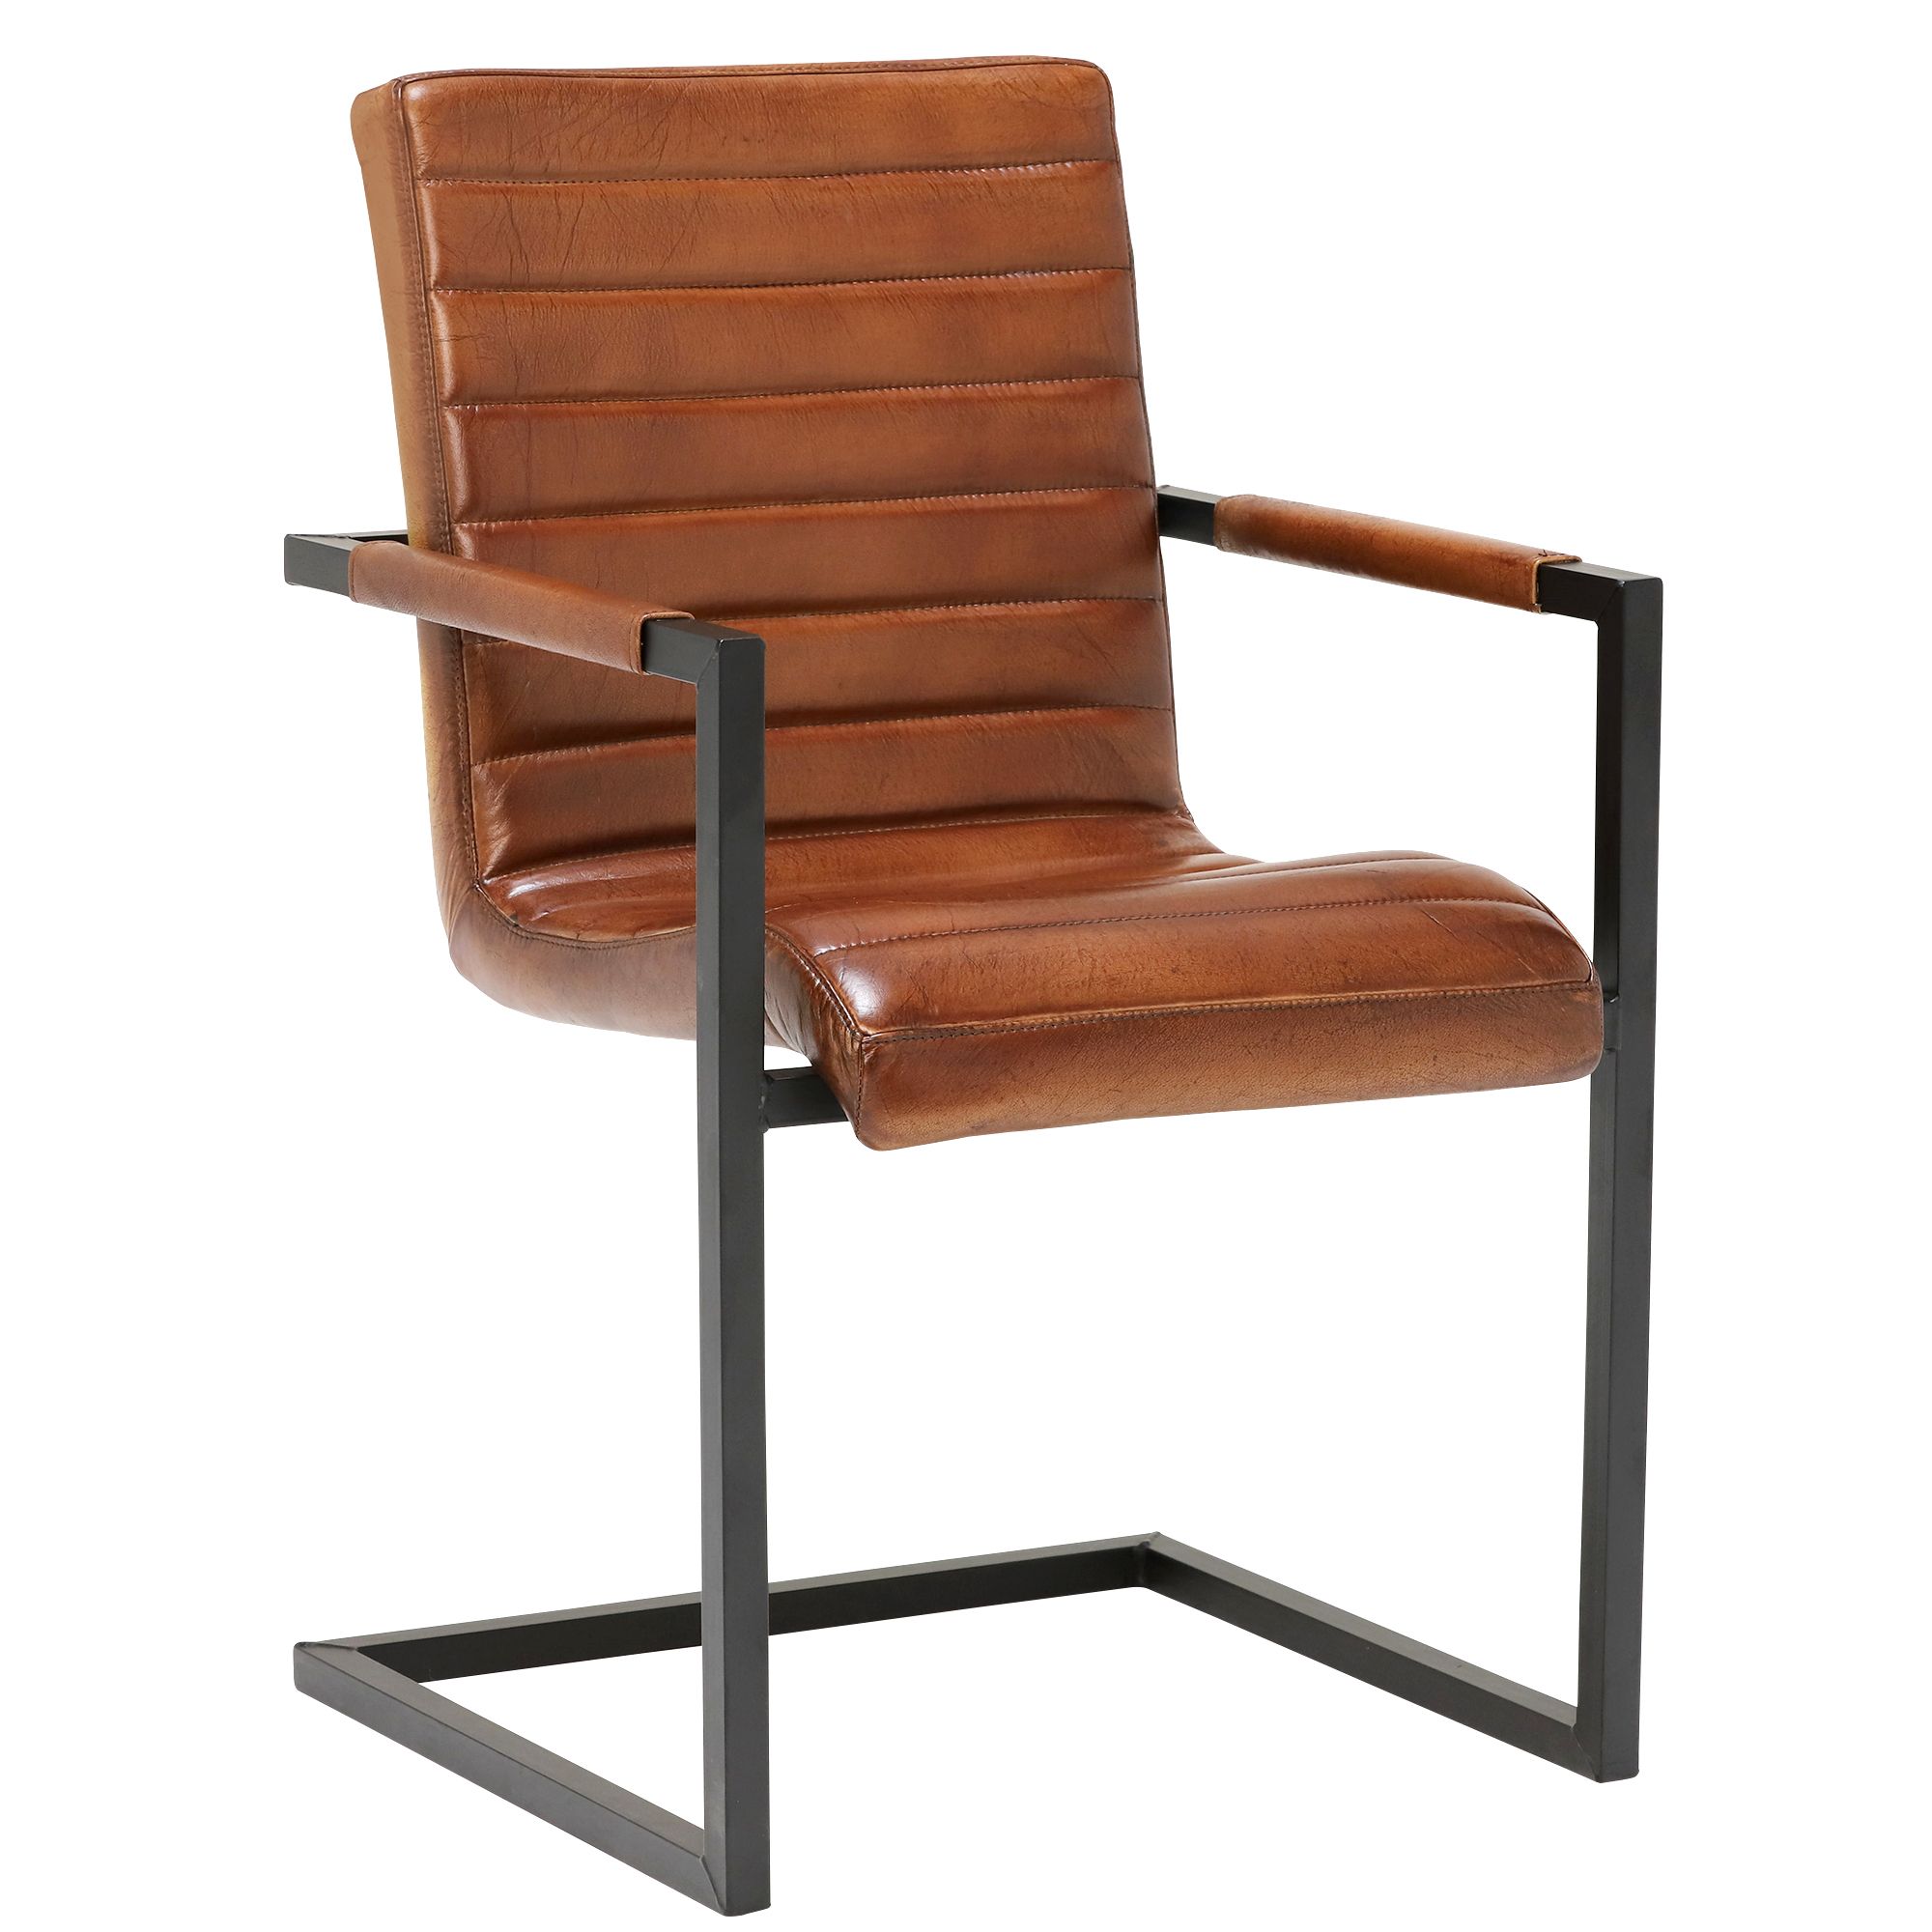 Brutus Buffalo Leather Dining Chair, Brown - Barker & Stonehouse